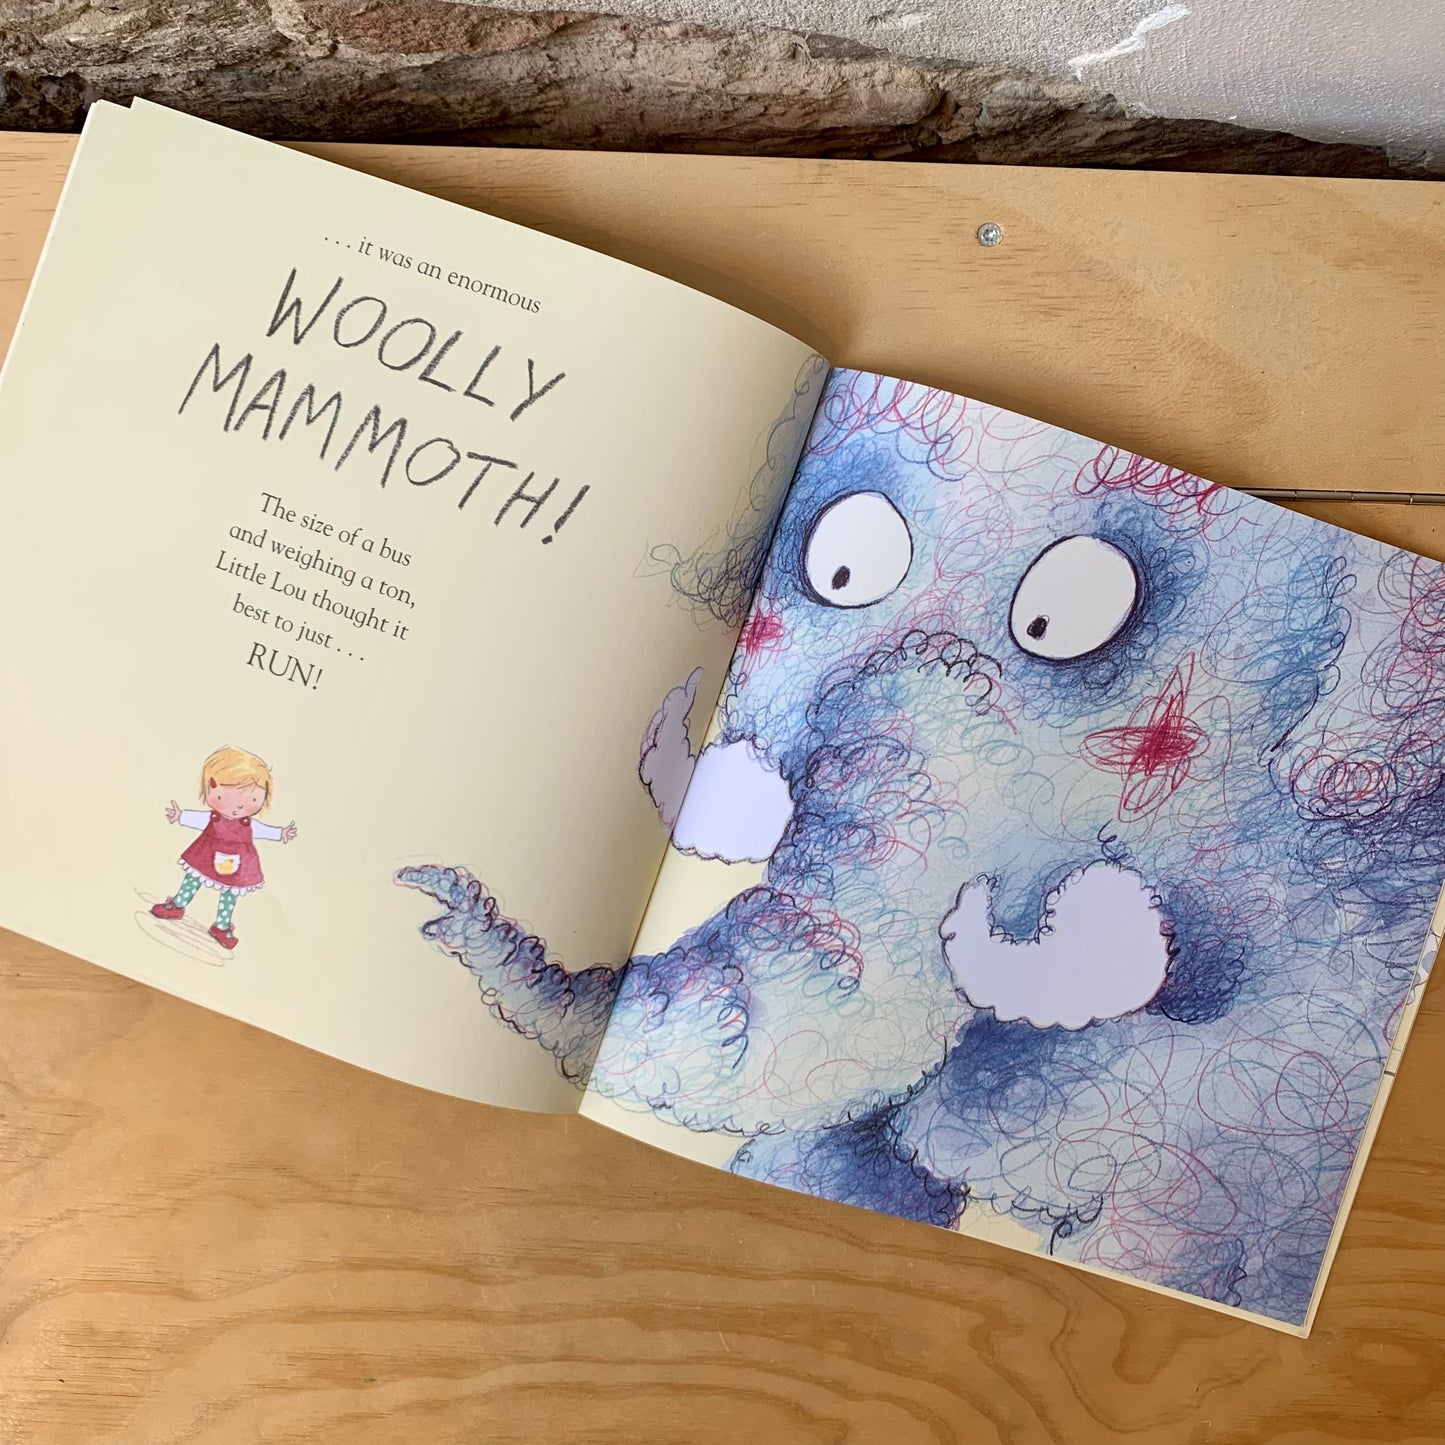 Little Lou and the Woolly Mammoth – Paula Bowles